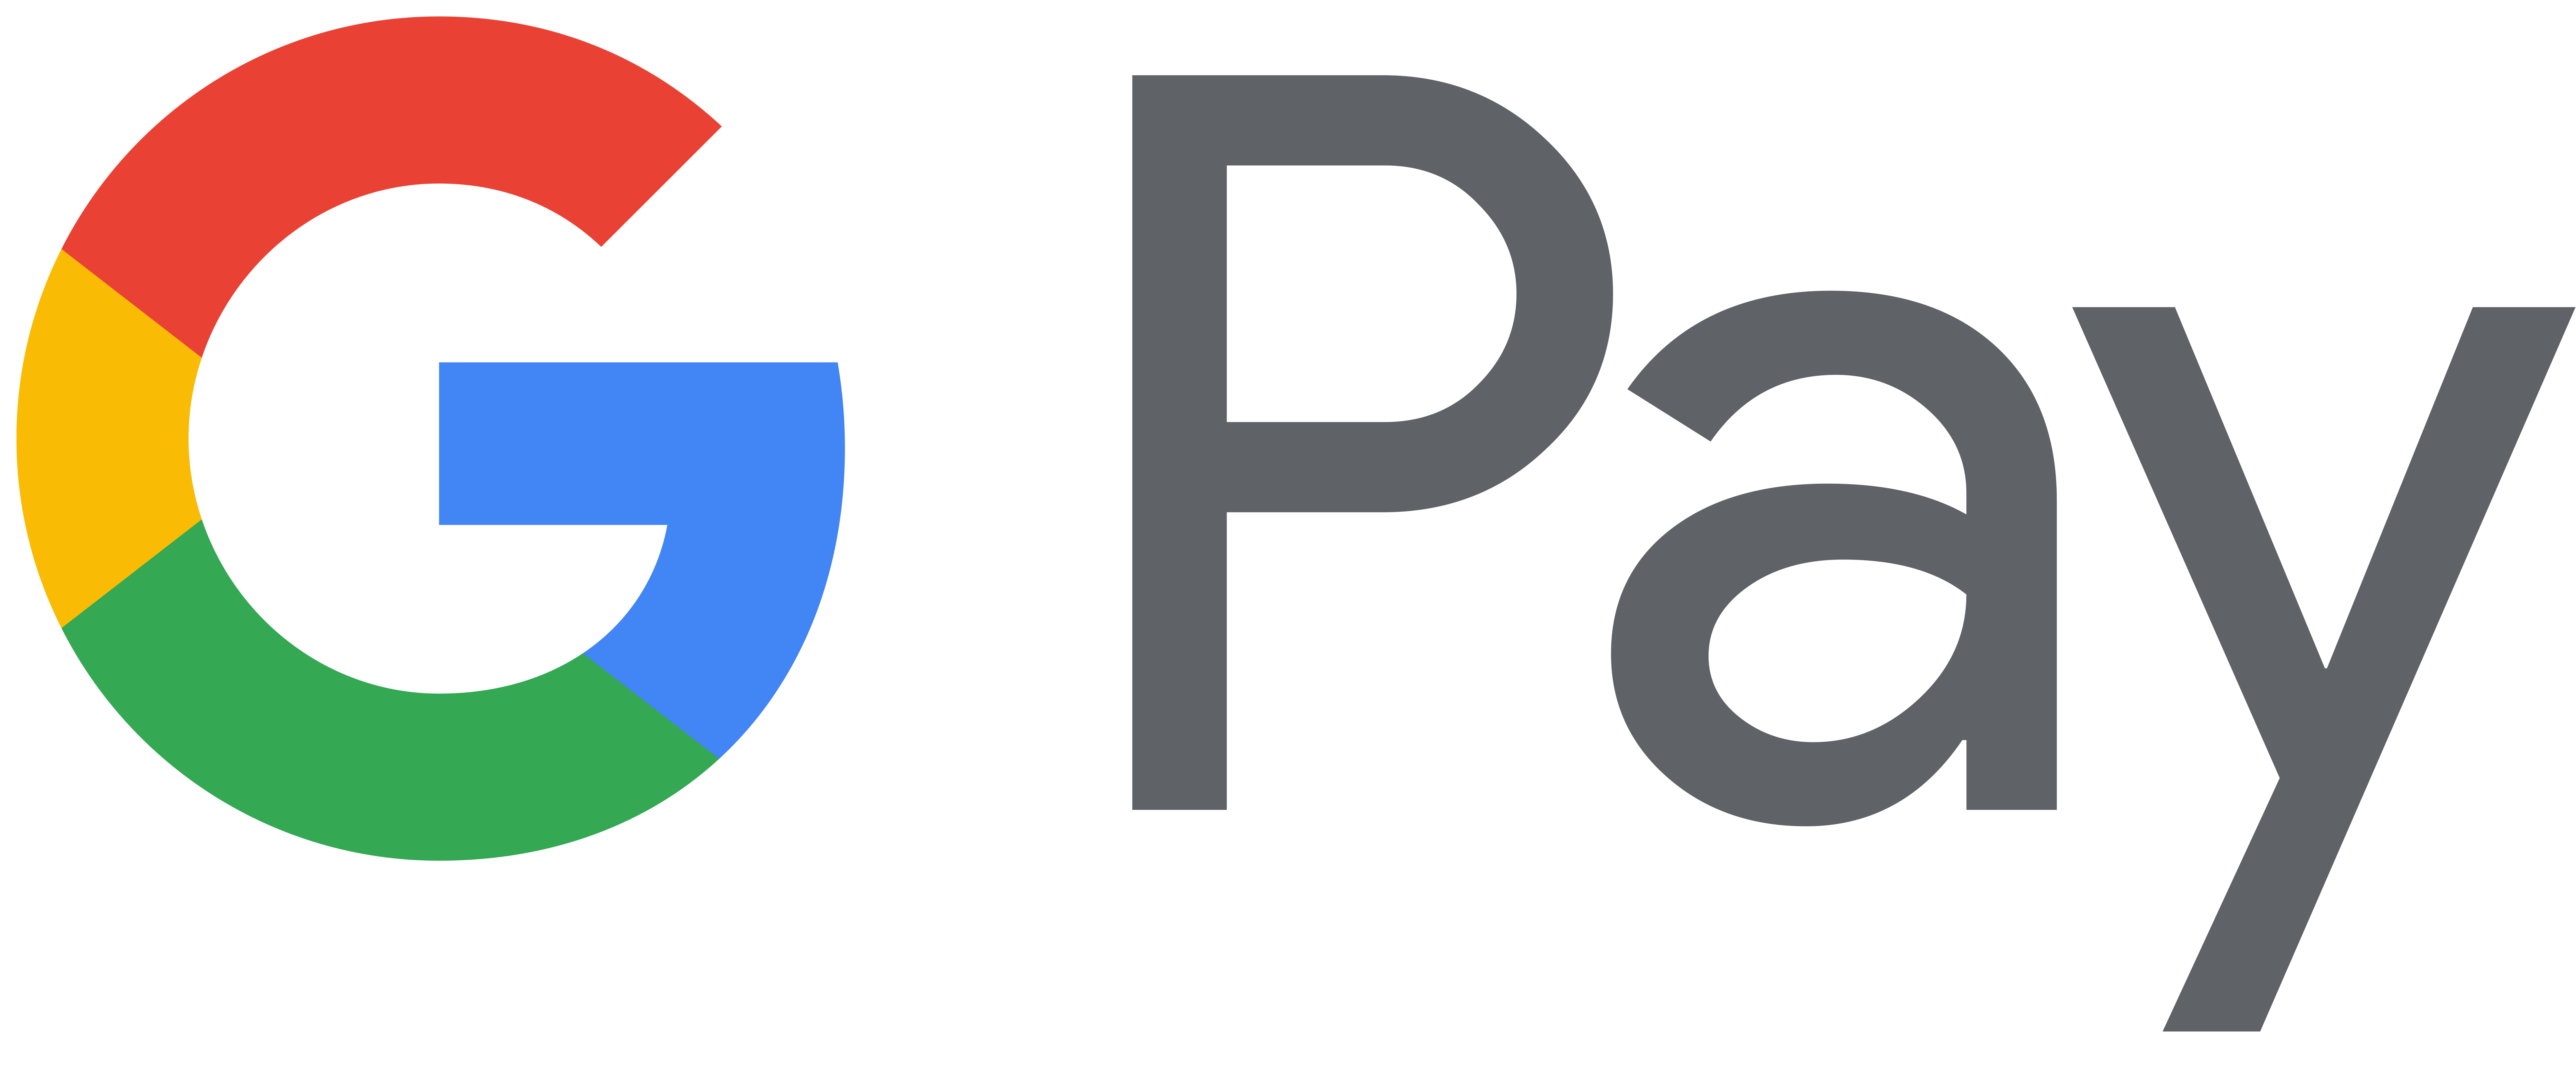 Download Google Pay GPay Logo PNG Image for Free